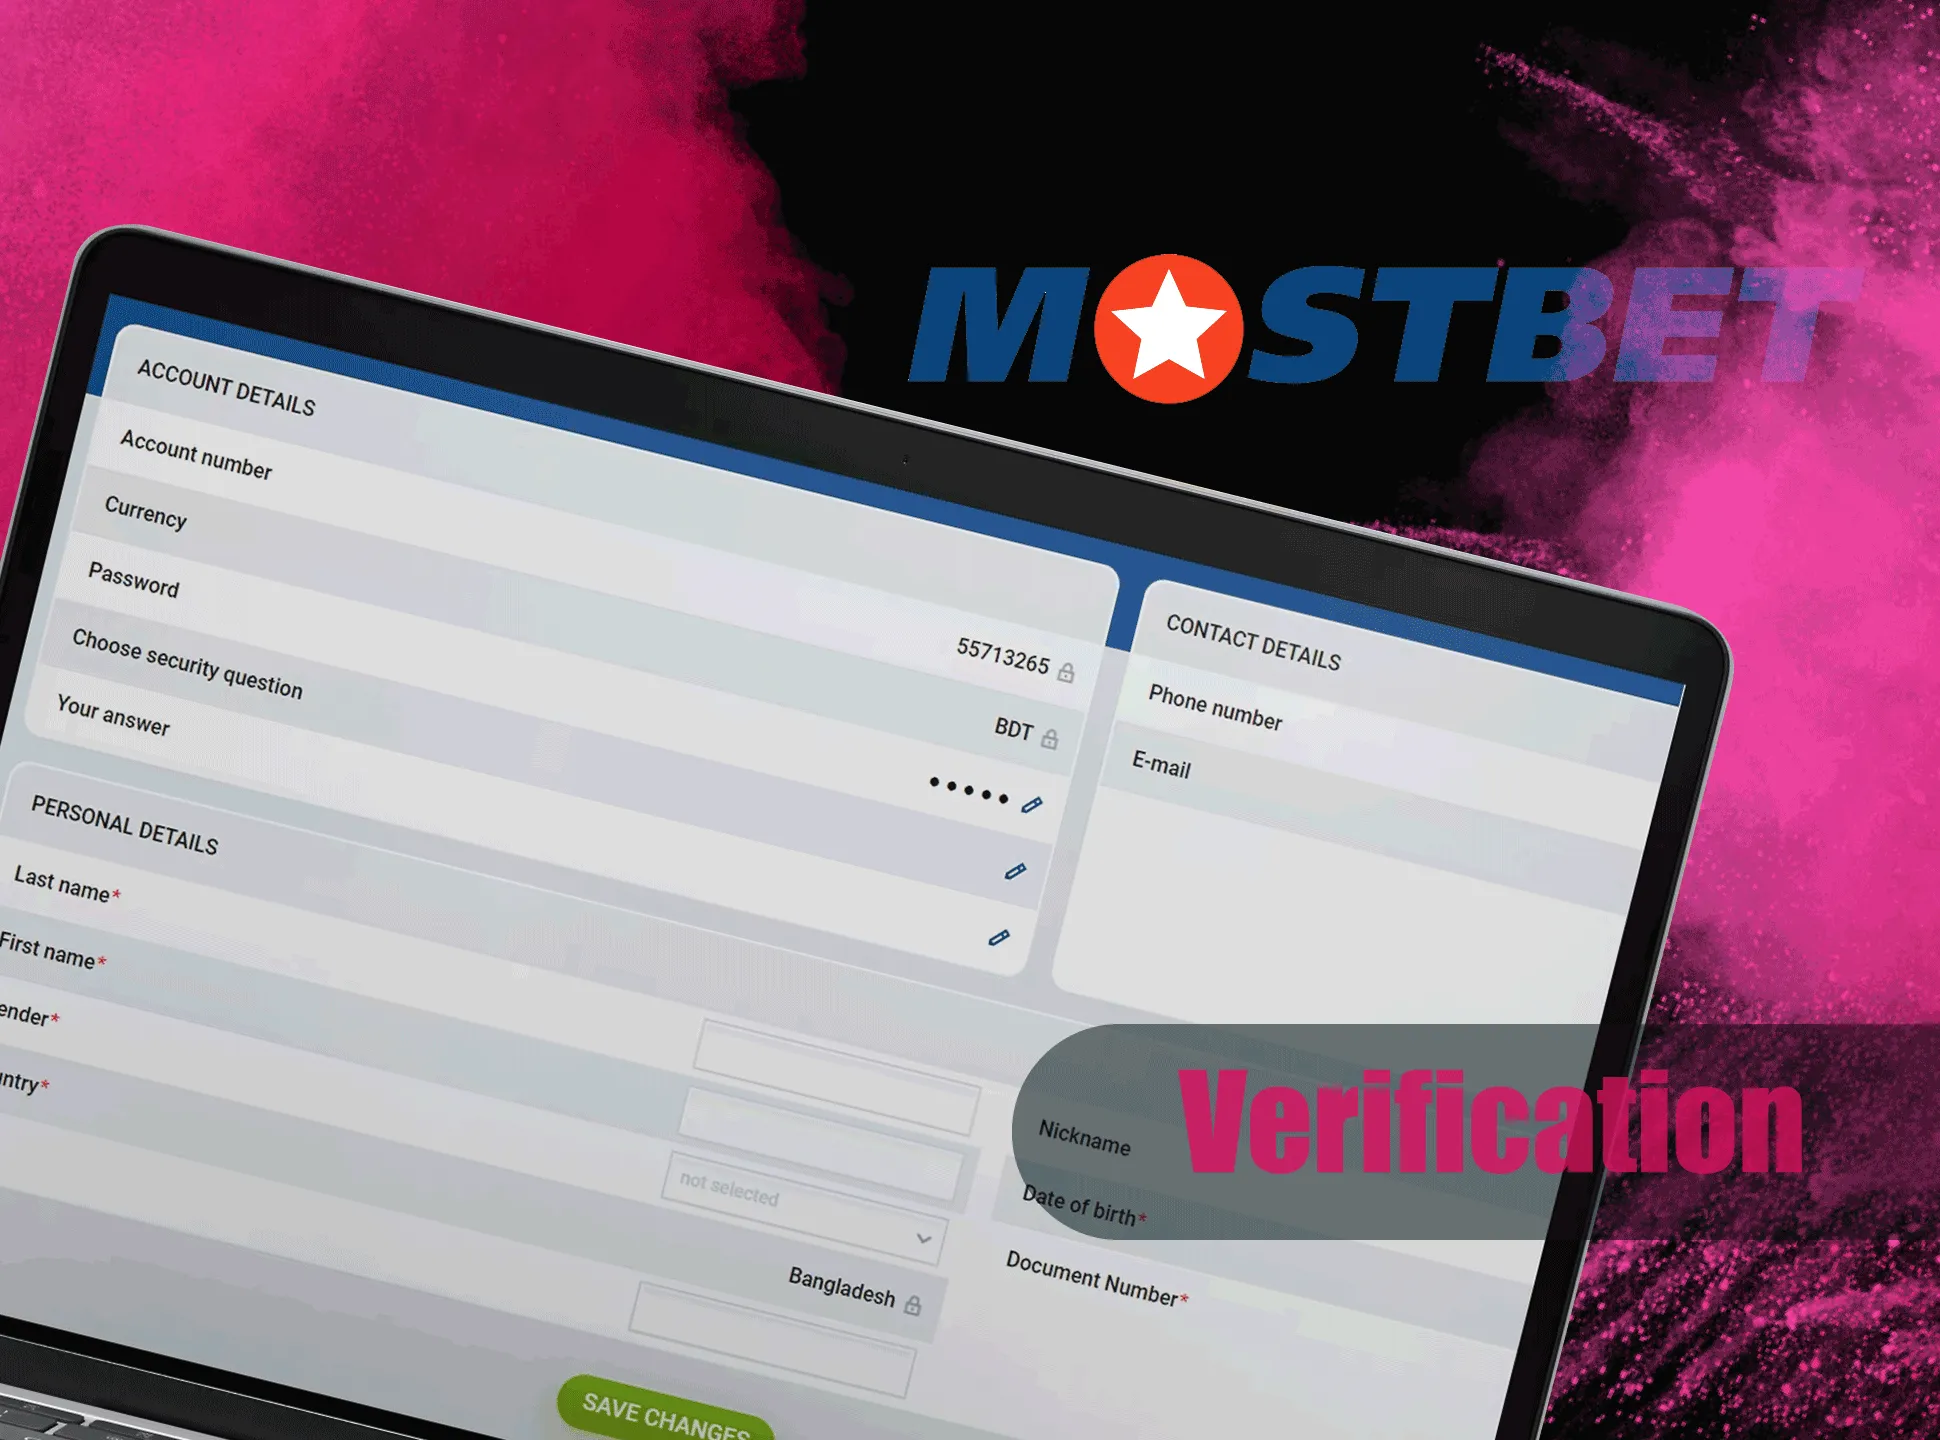 You should pass the verification process to withdraw money from Mostbet.